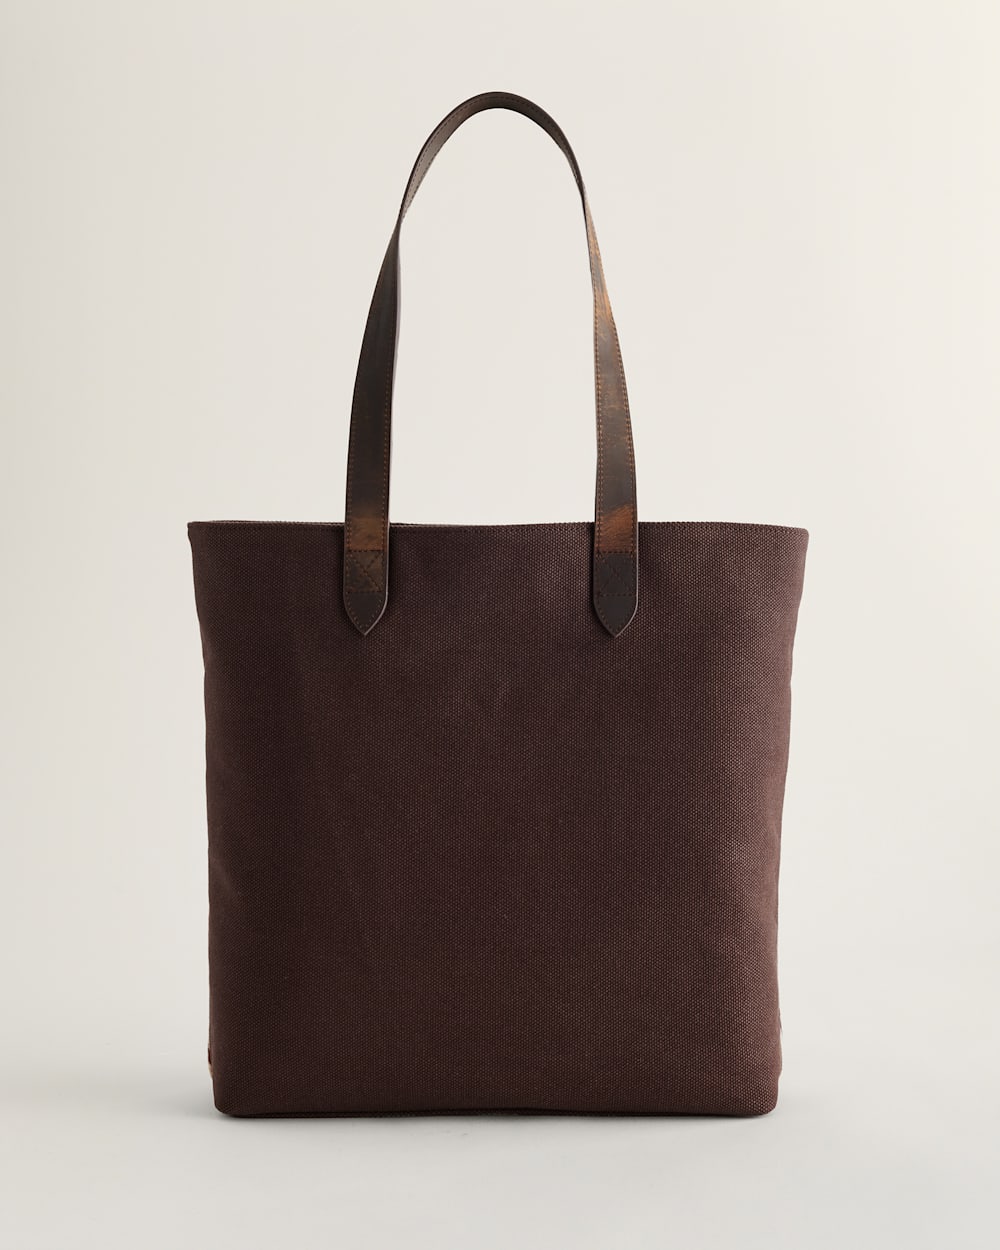 ALTERNATE VIEW OF PASCO WOOL/LEATHER MARKET TOTE IN SUNSET MULTI image number 3